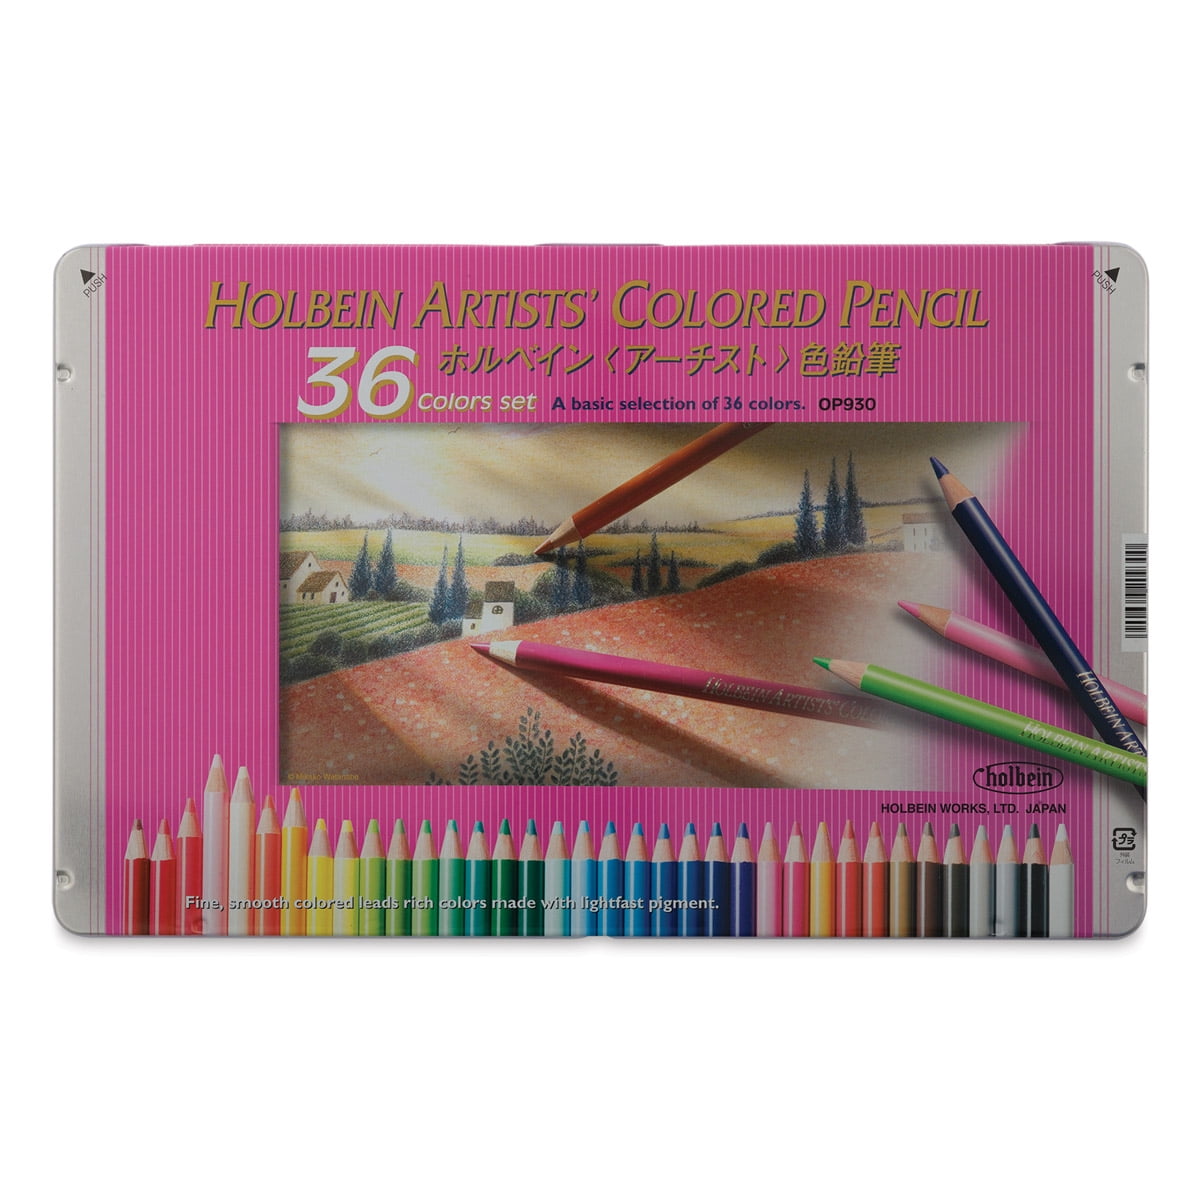 Holbein Colored Pencils: Are soft, waxy pencils right for you? — Vanilla  Arts Co.